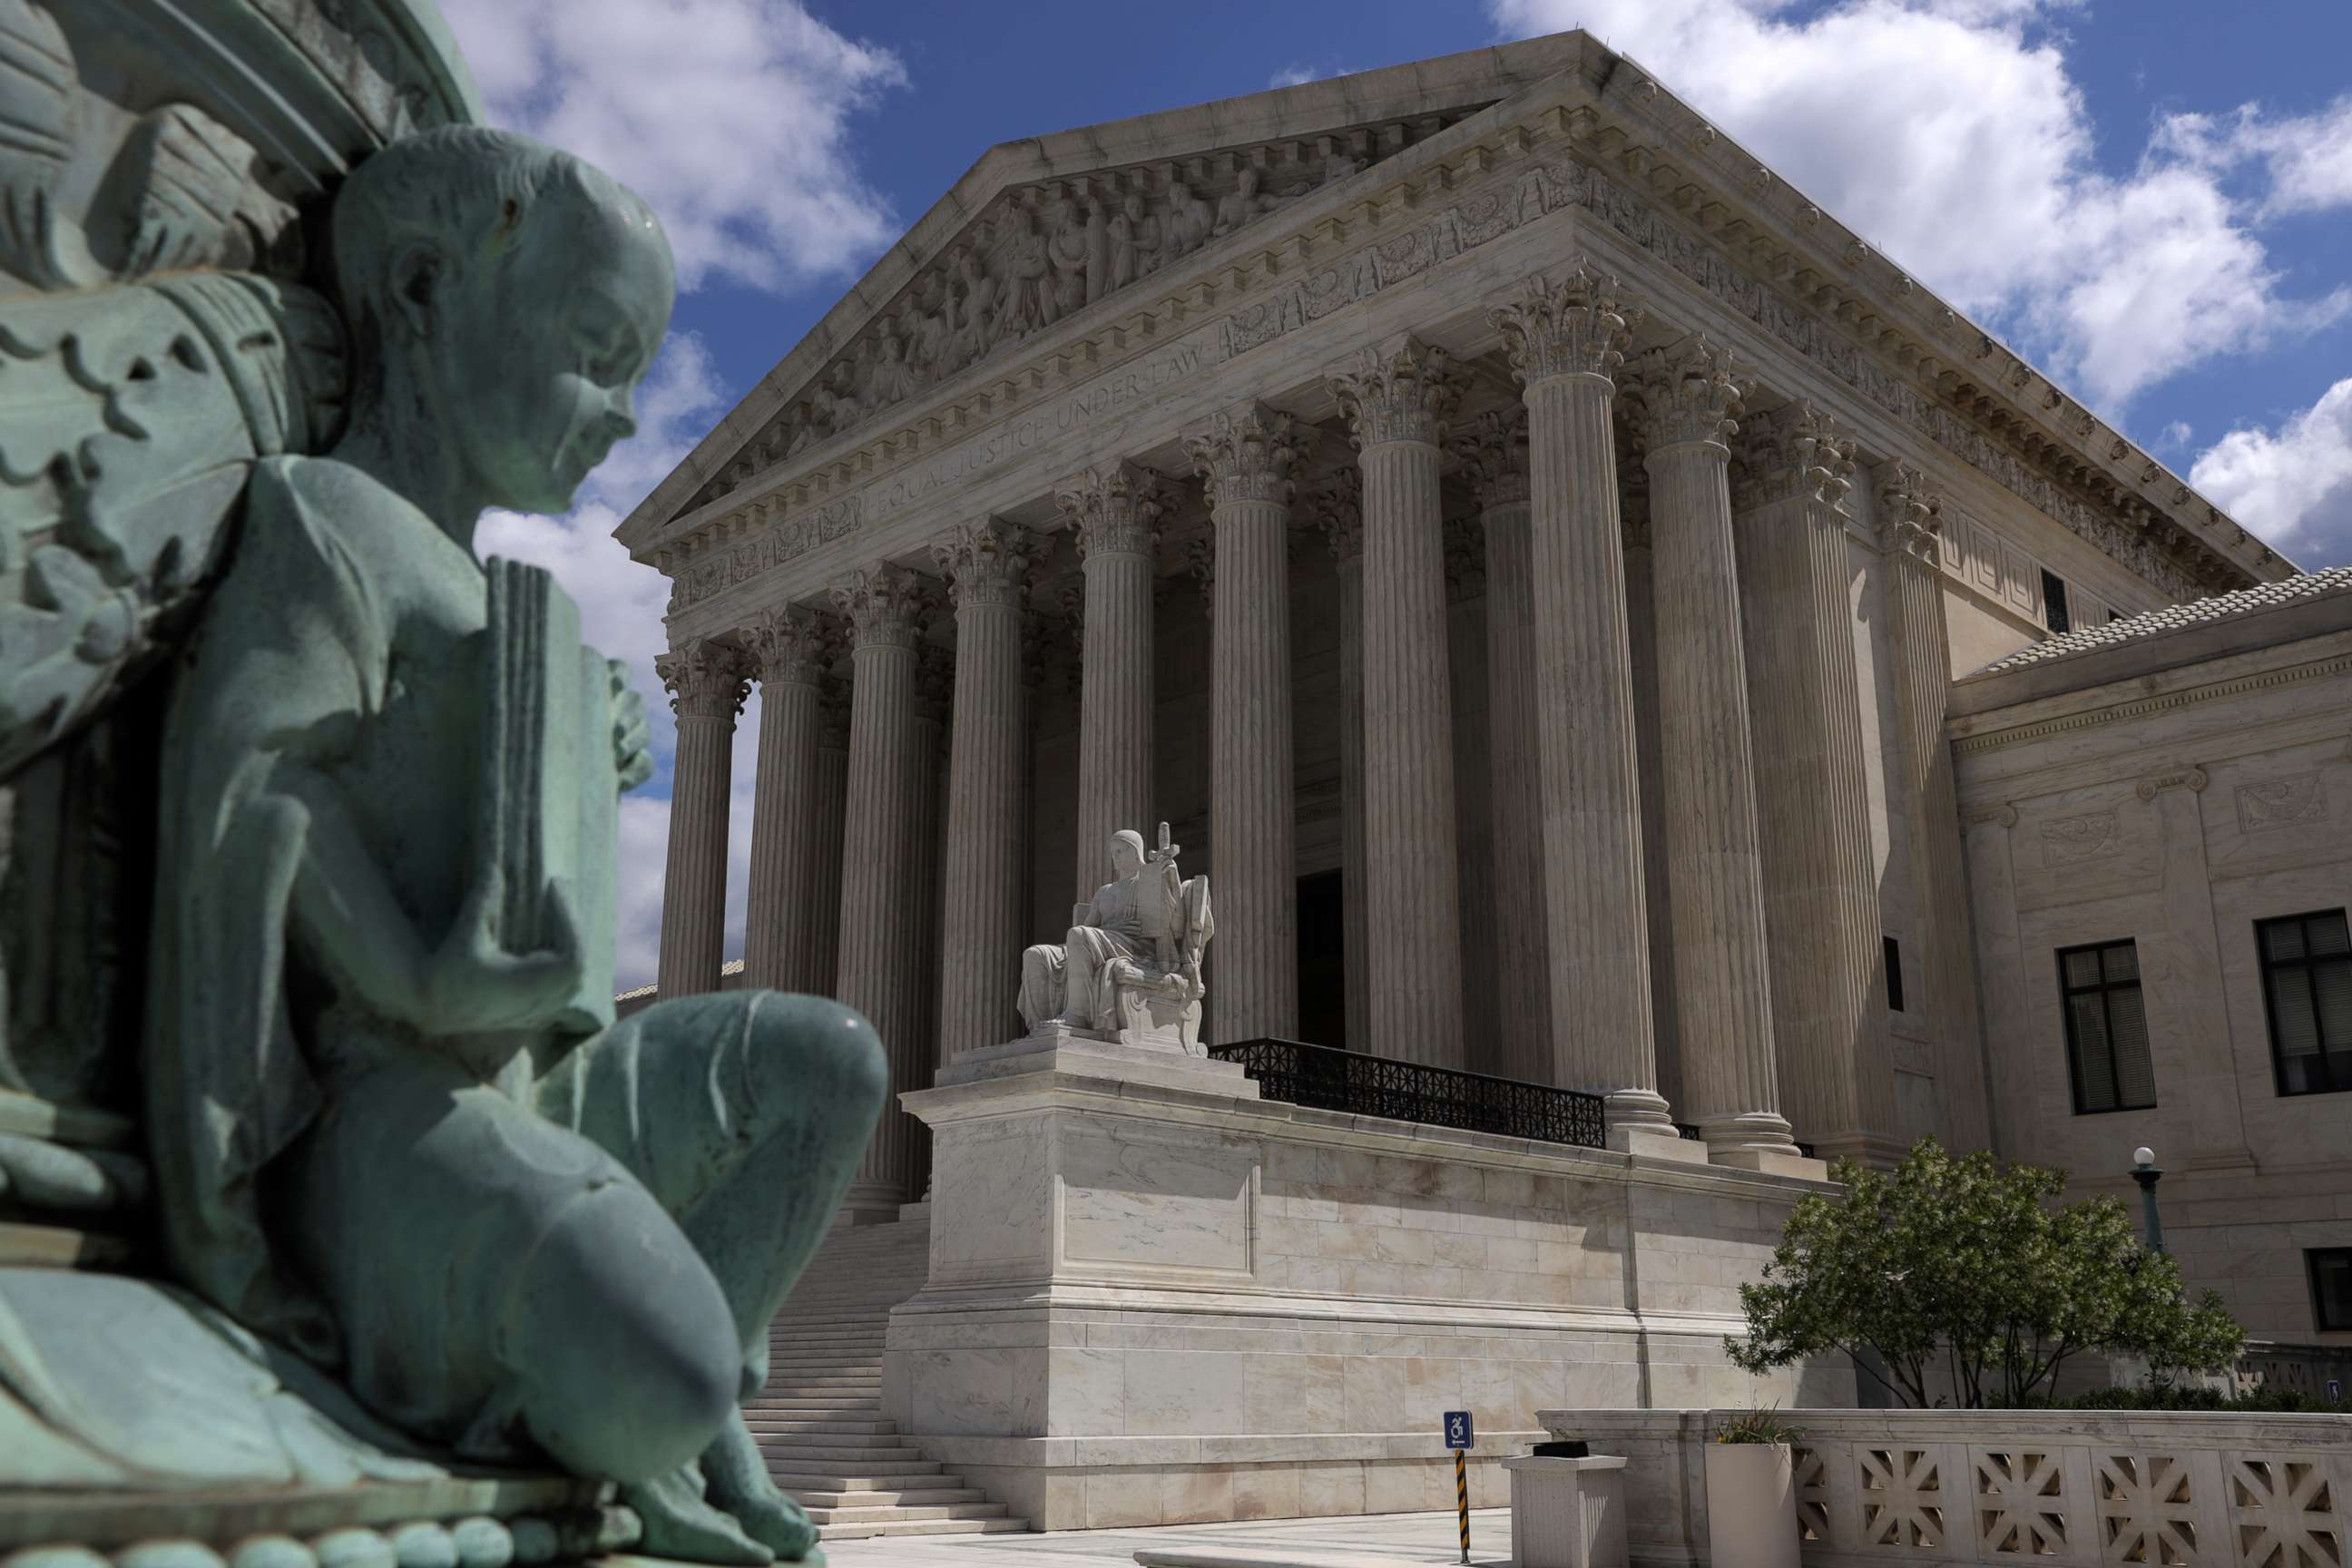 PHOTO: An exterior view of the U.S. Supreme Court building May 12, 2020 in Washington, D.C.